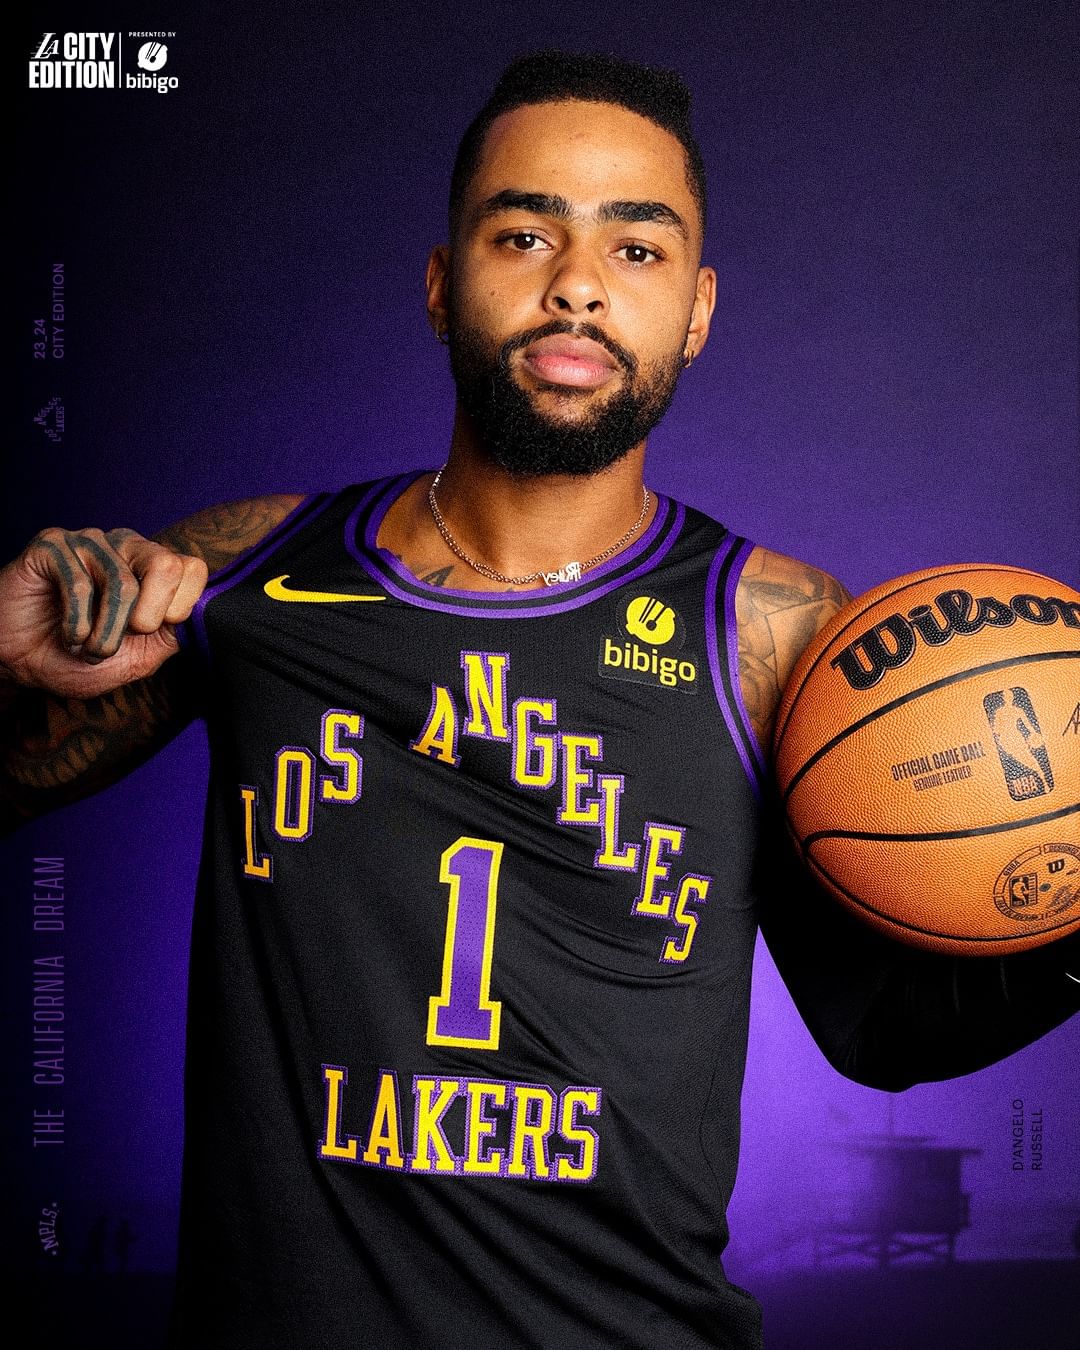 The NBA is making a substantial effort in promoting its City Edition campaign, which involves unveiling the new City Edition jerseys for the Los Angeles Lakers. - amazingmindscape.com